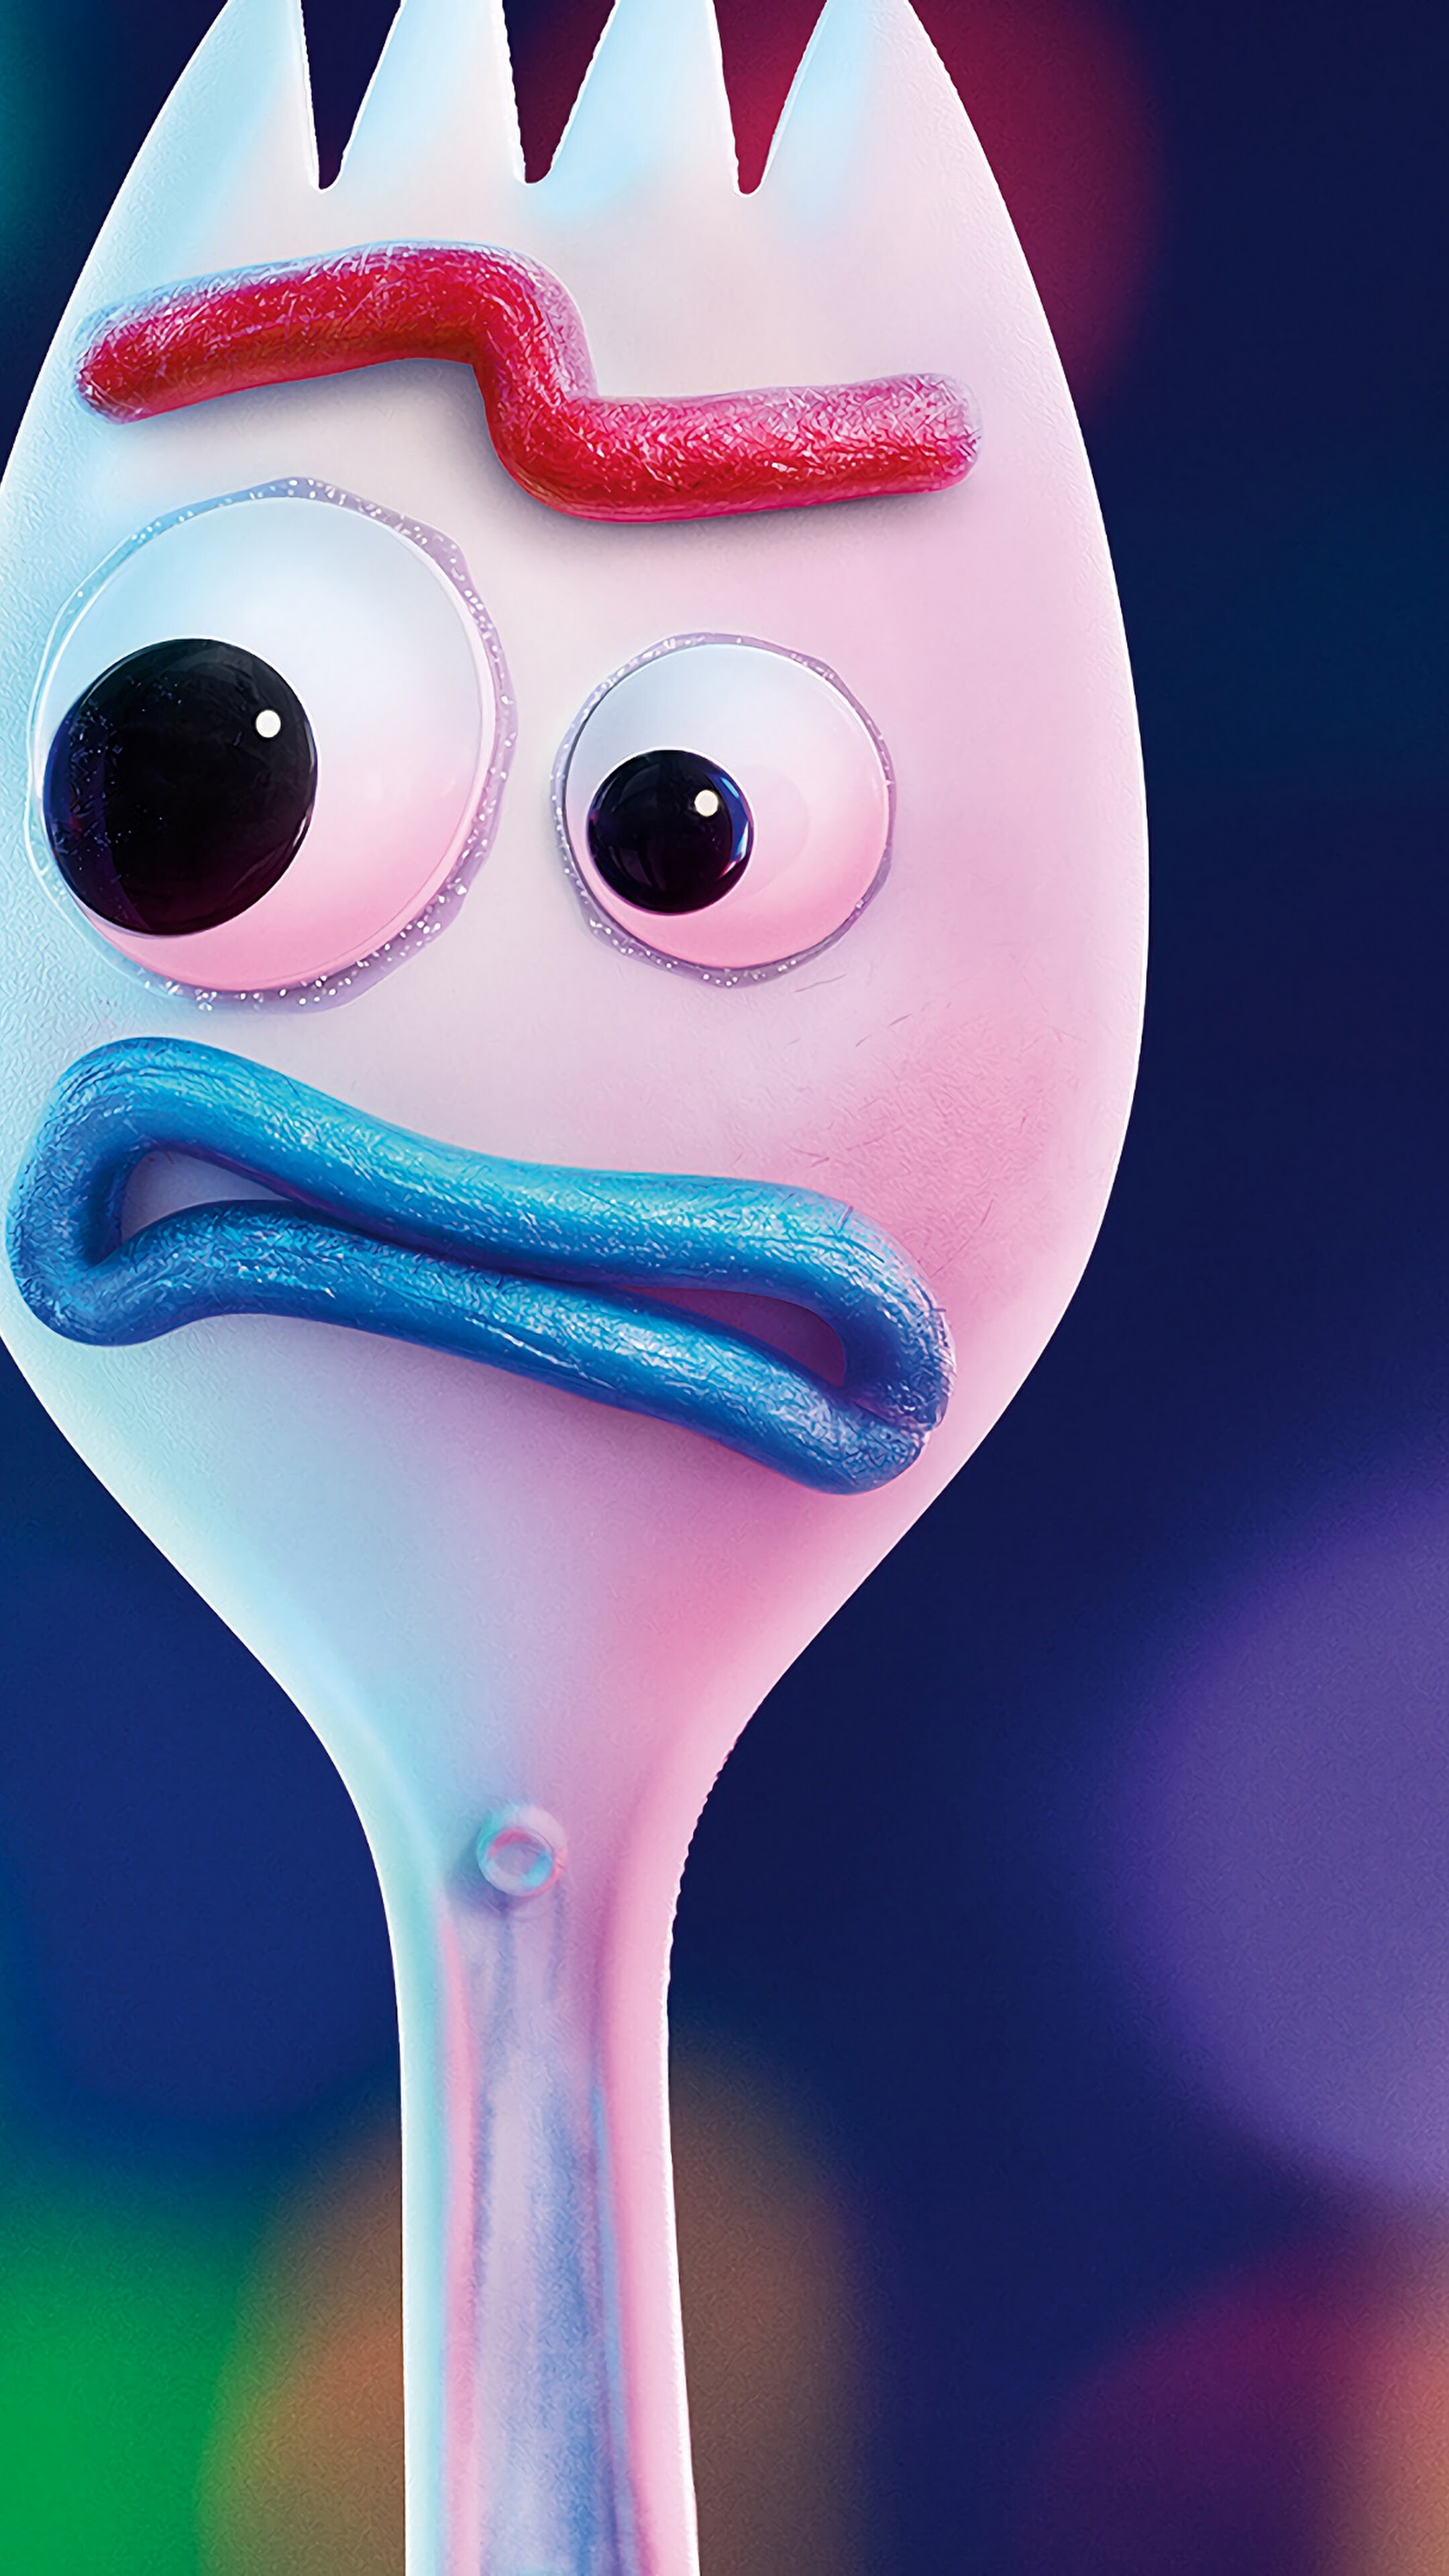 Toy Story: Forky, a sentient plastic spork with googly eyes, pipe cleaner arms and popsicle stick legs. 2160x3840 4K Wallpaper.